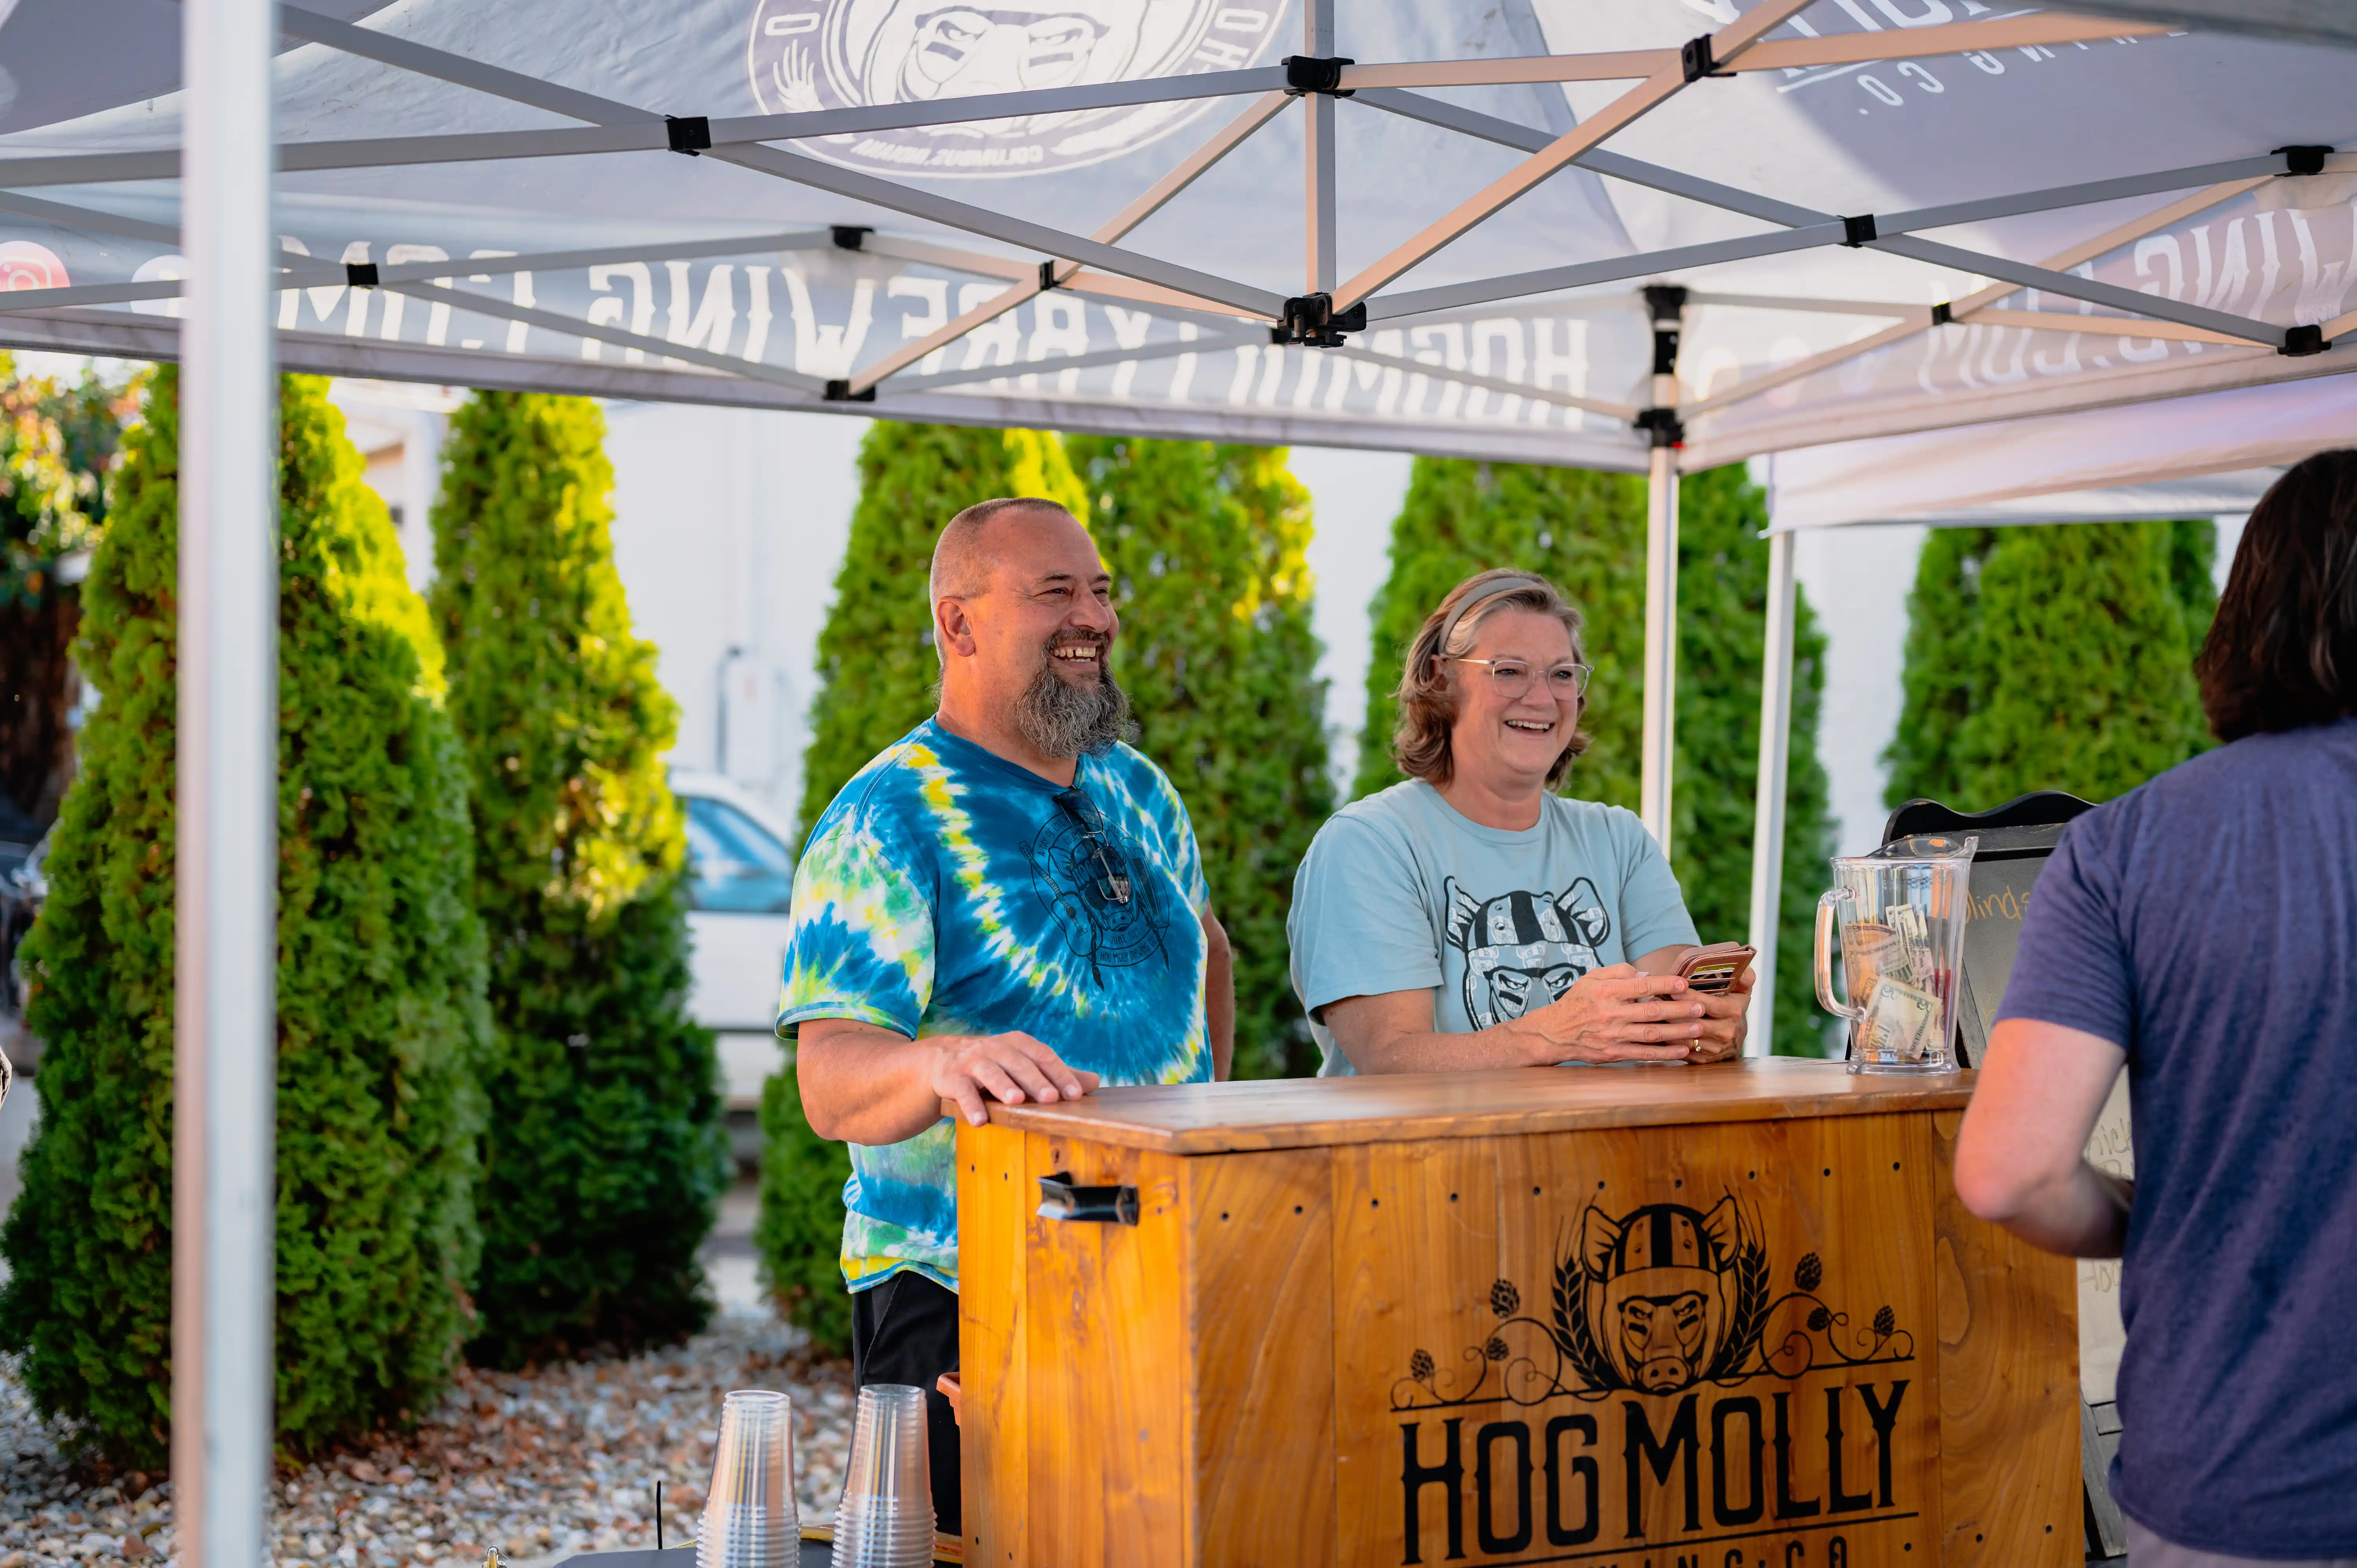 Two people standing under a branded tent, one wearing a tie-dye shirt and the other in gray, smiling and looking towards a customer at their outdoor vendor booth with the sign "HOG MOLLY".